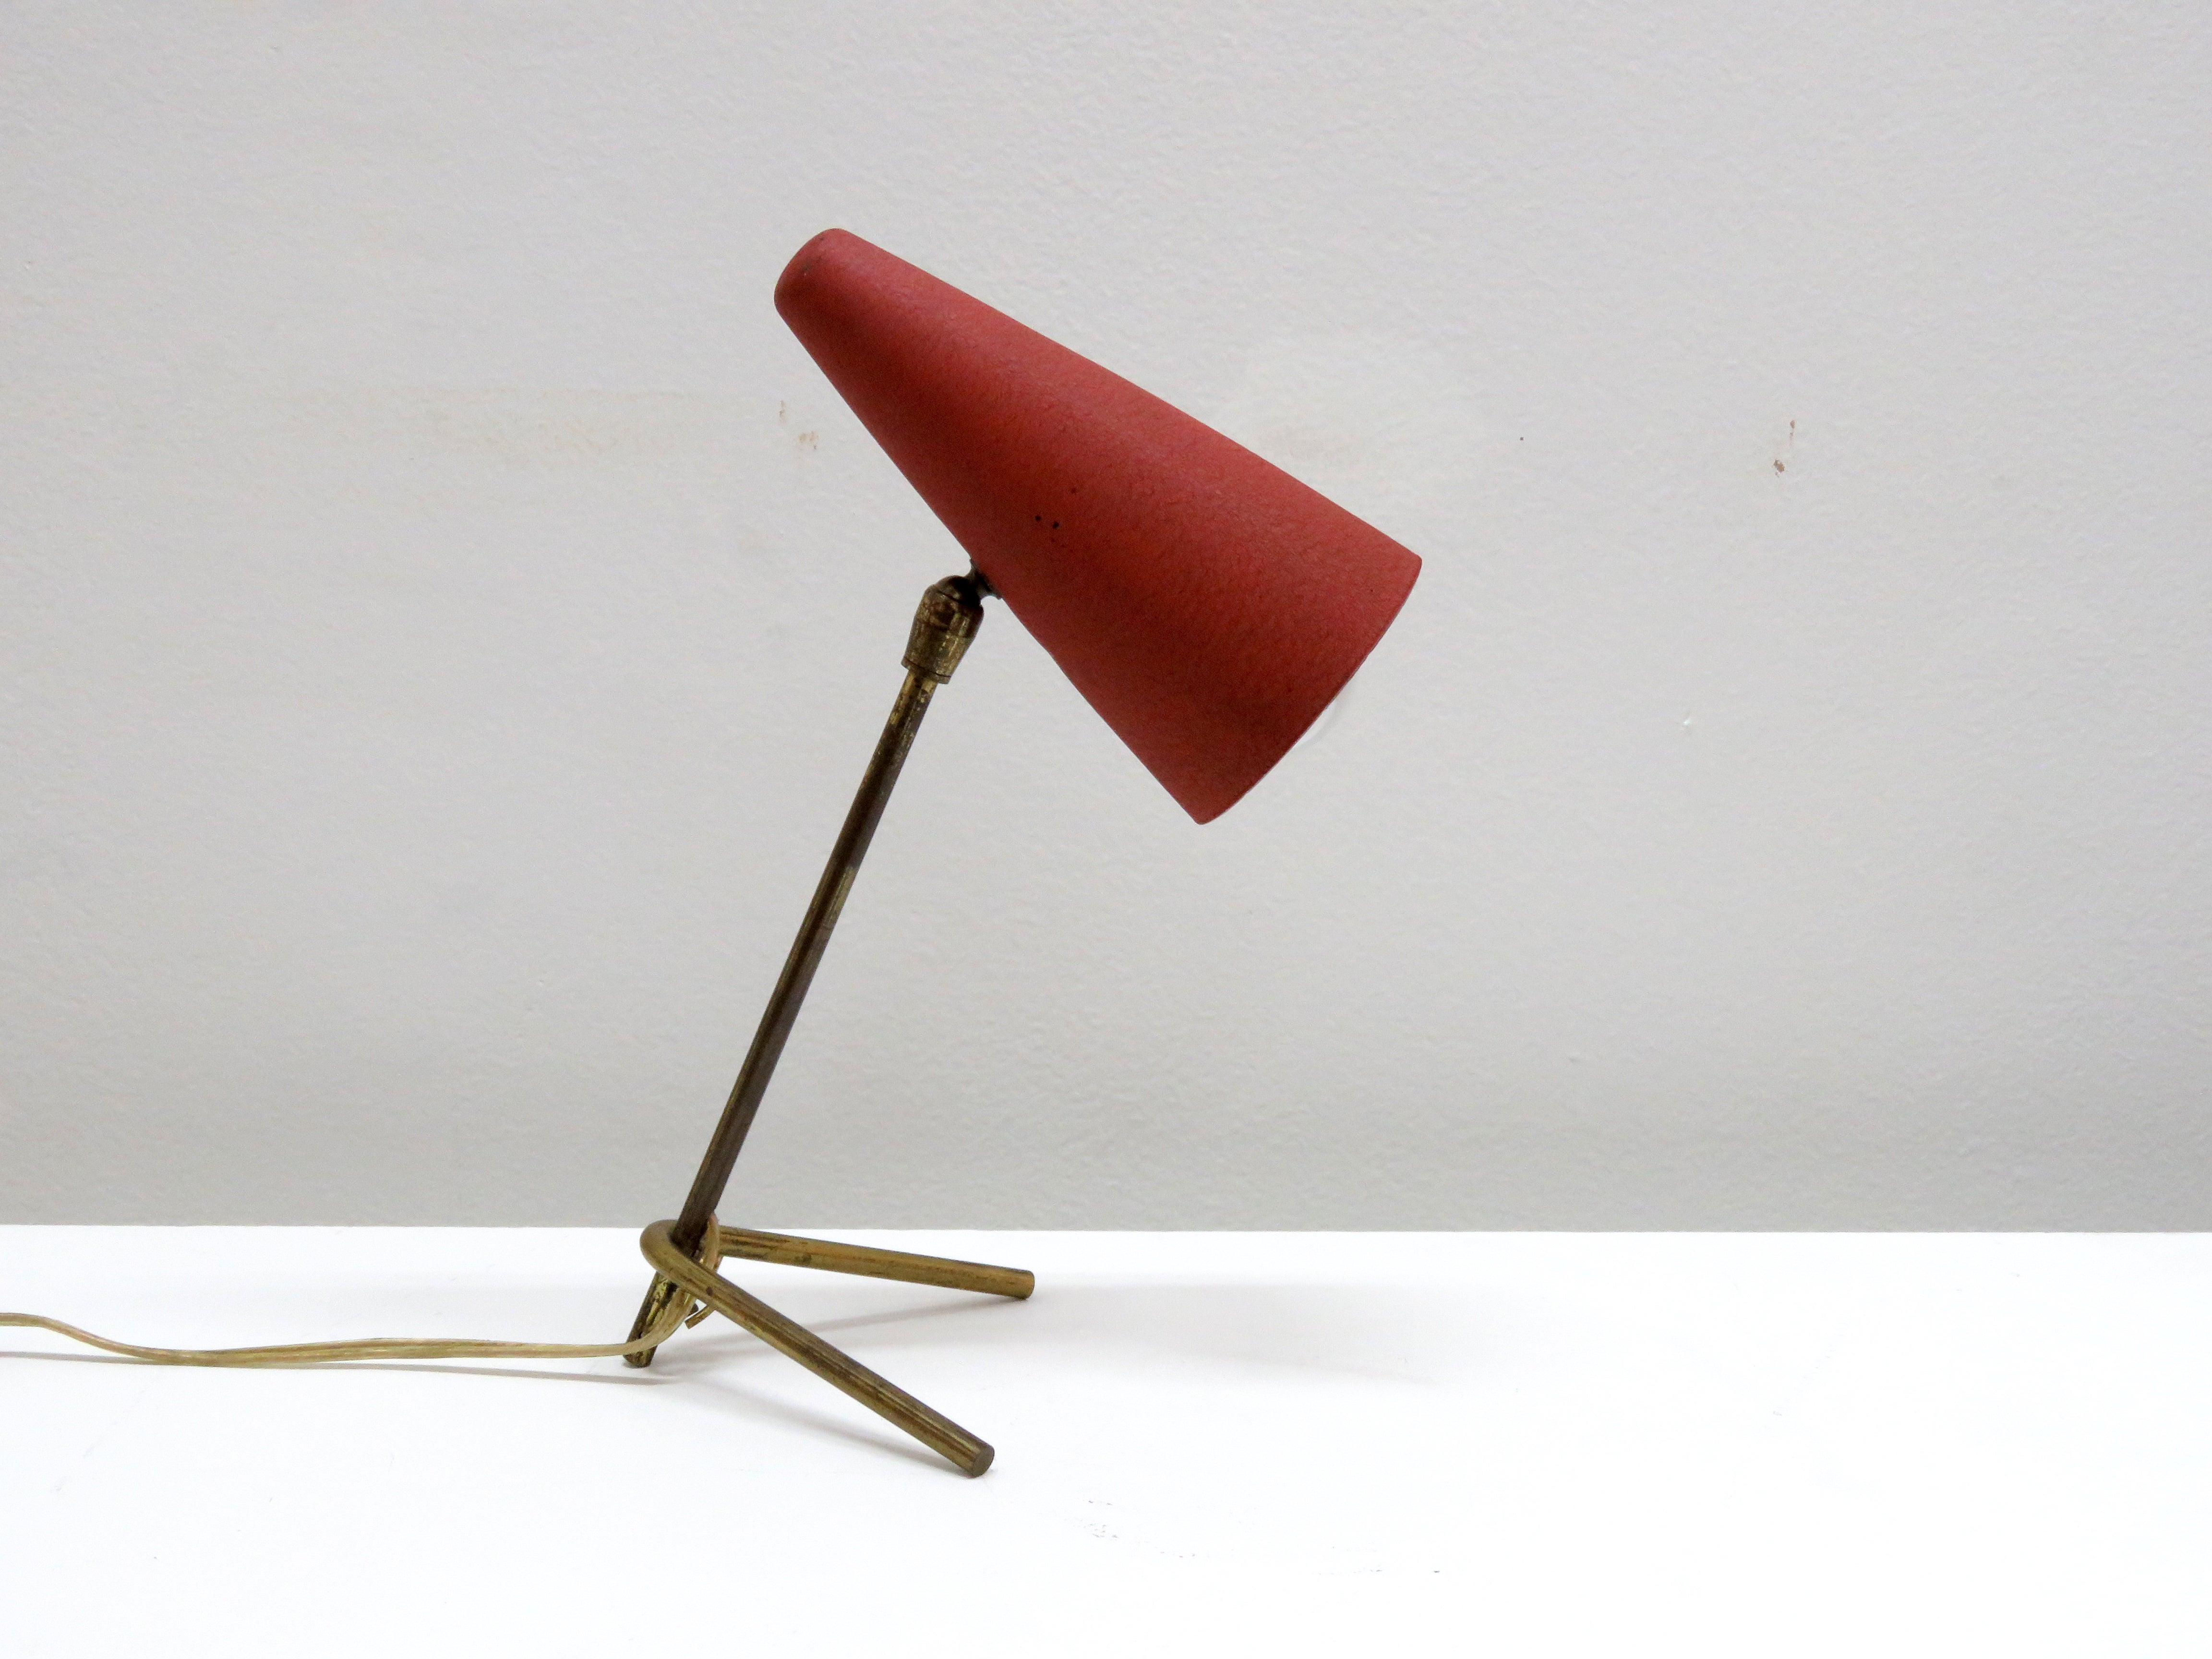 wonderful, petite table lamp by Stilux with patinaed brass frame and original, articulate red enameled shade, can be used as wall light as well. Wired for US standards, one E12 socket, max. wattage 60w, bulb provided as a onetime courtesy. Can be UL